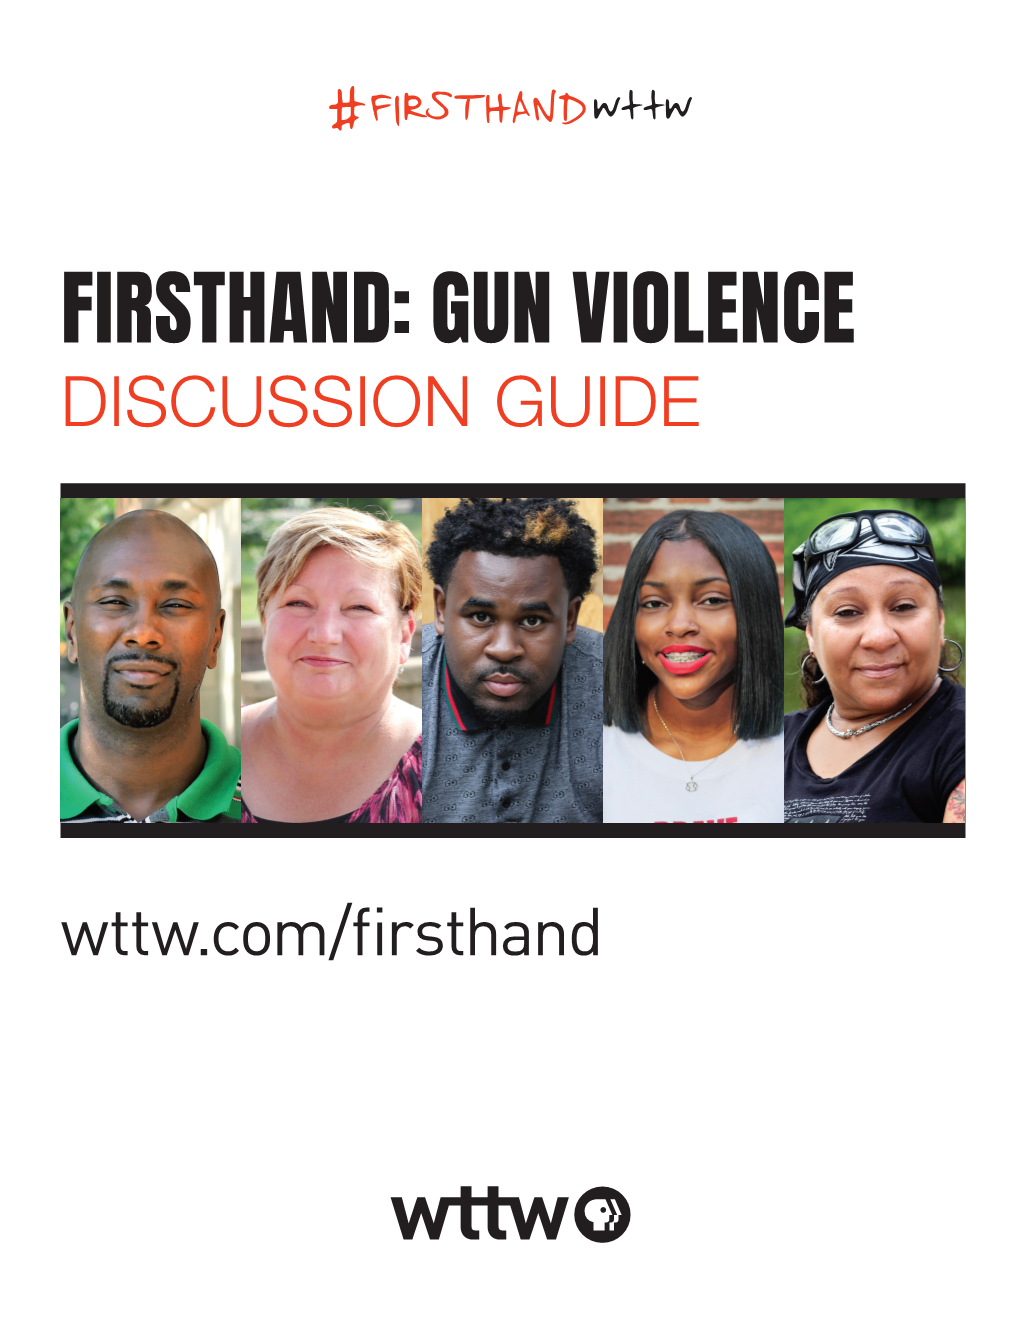 Firsthand Discussion Guide.Indd